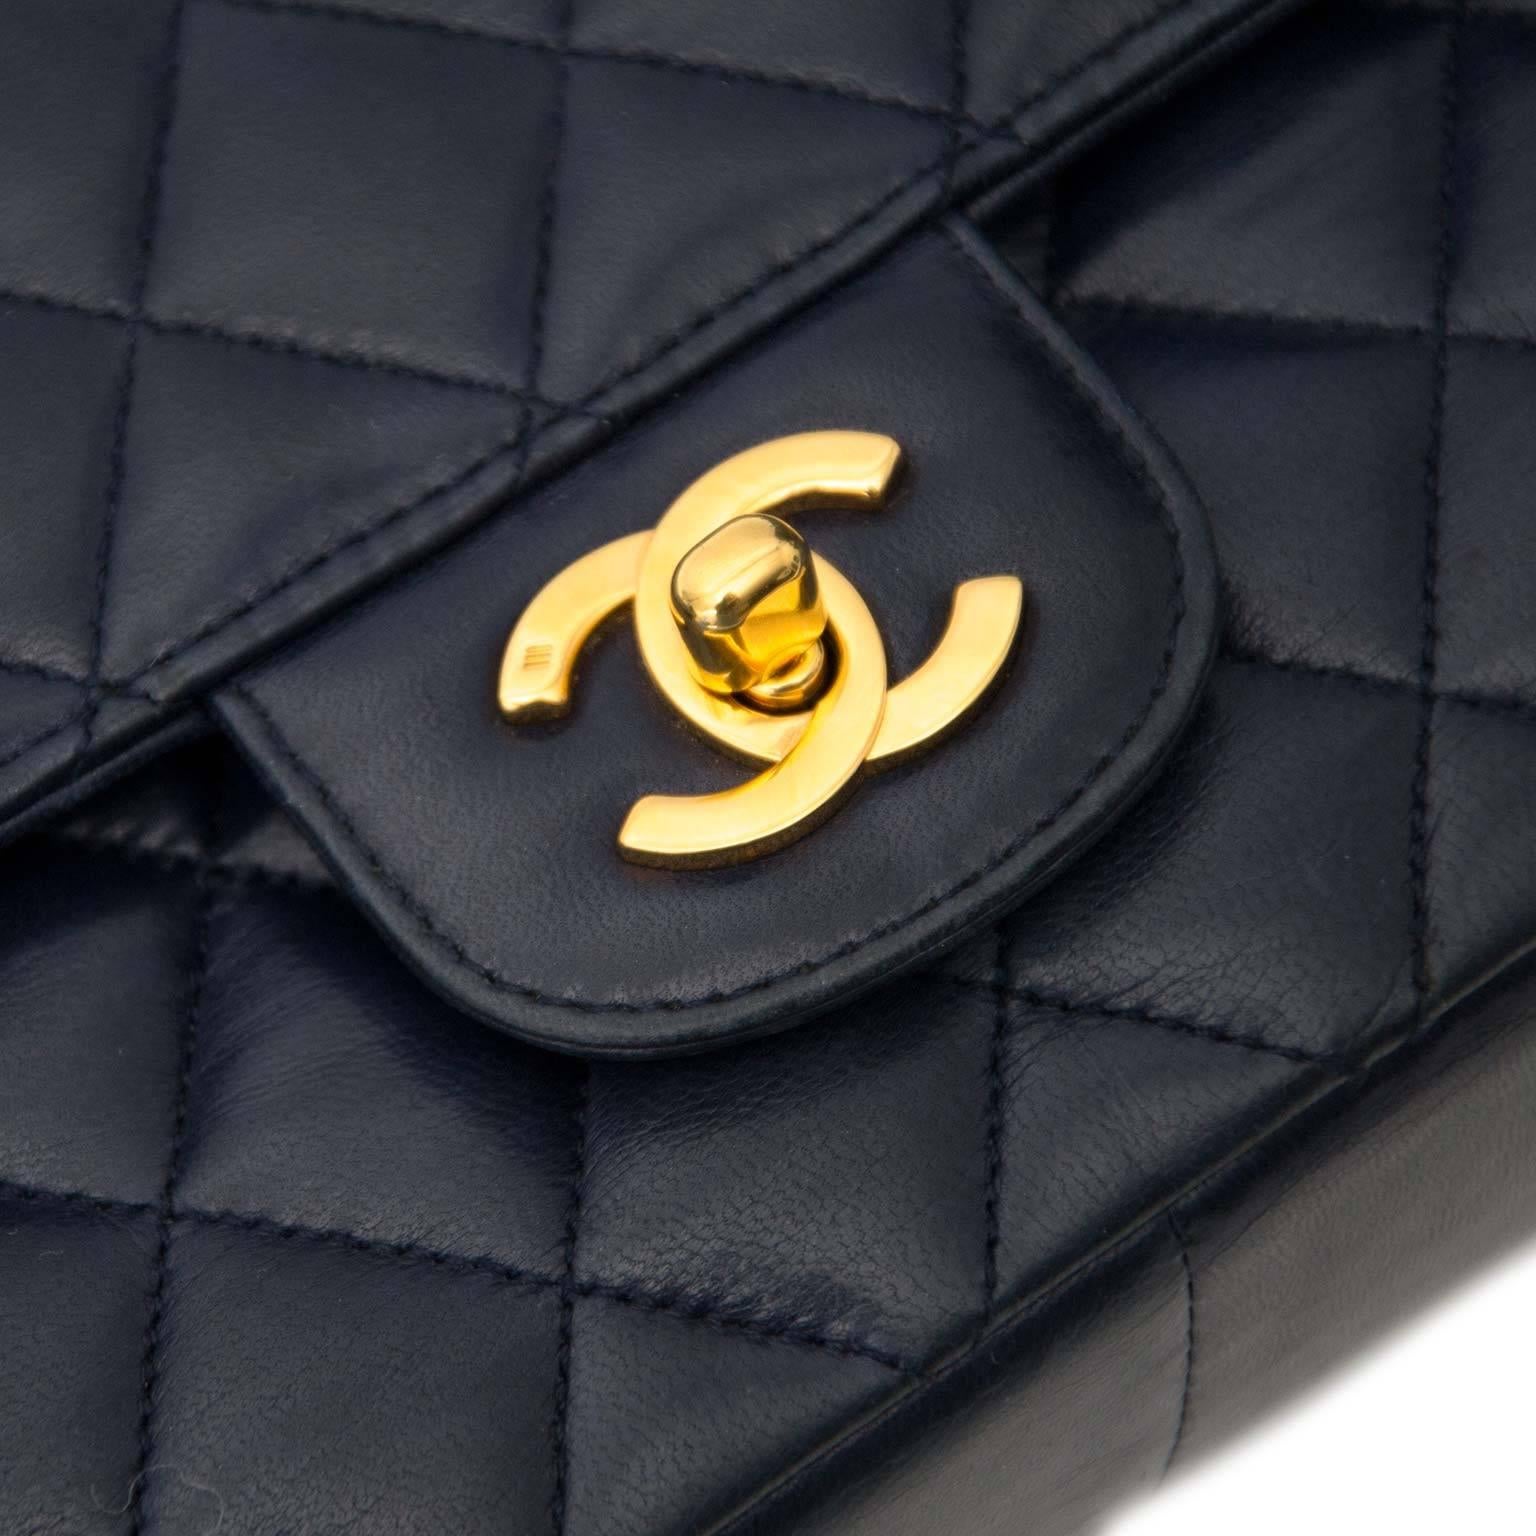 Good preowned condition

Chanel Vintage Blue Leather Classic Flap Bag

Smooth calfskin leather flap bag by Chanel. This vintage beauty stems from the early 90's and features gorgeous gold toned hardware.

The CC turn lock on the front opens into a